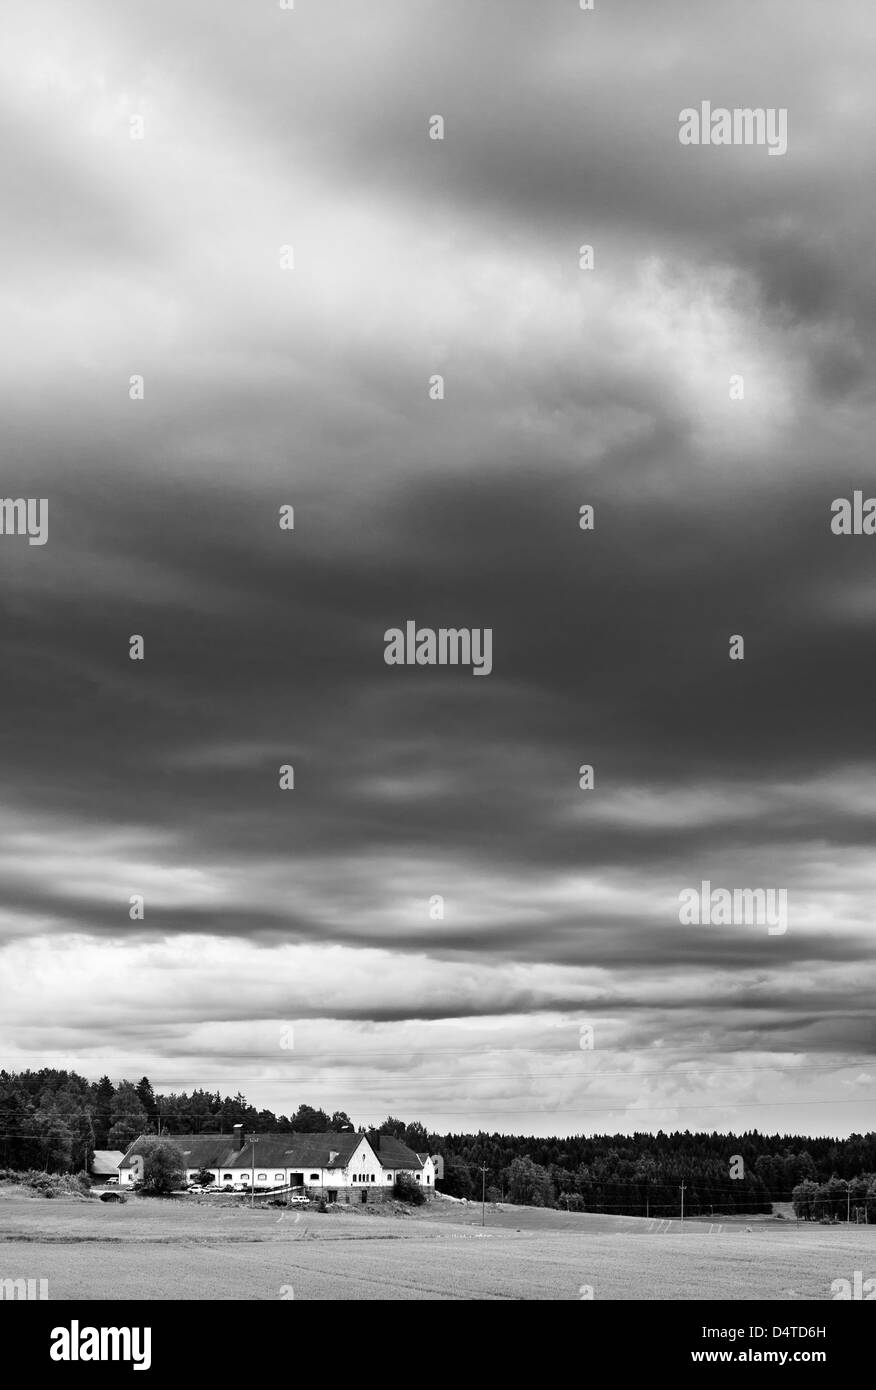 Stormy, ominous sky with a farm house in the background Stock Photo